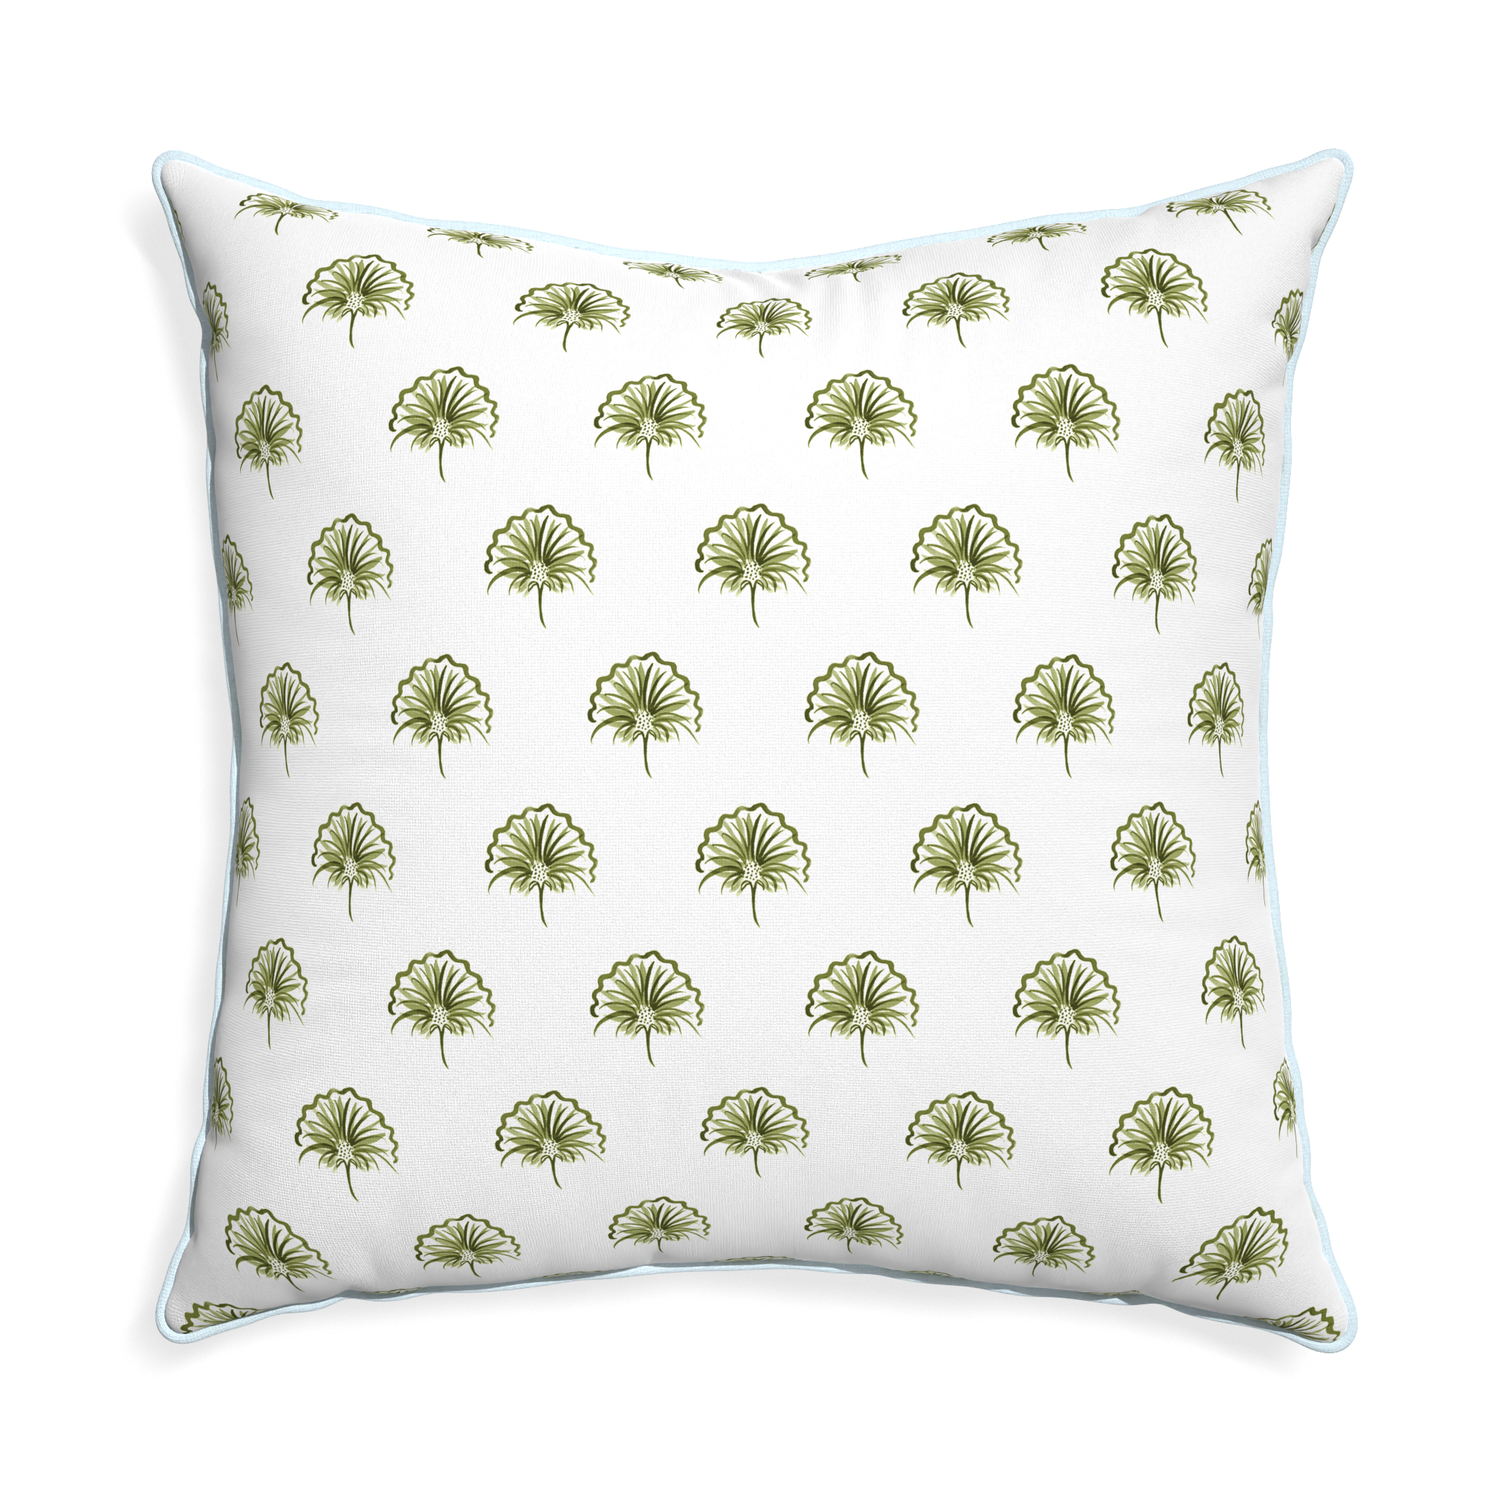 Euro-sham penelope moss custom green floralpillow with powder piping on white background